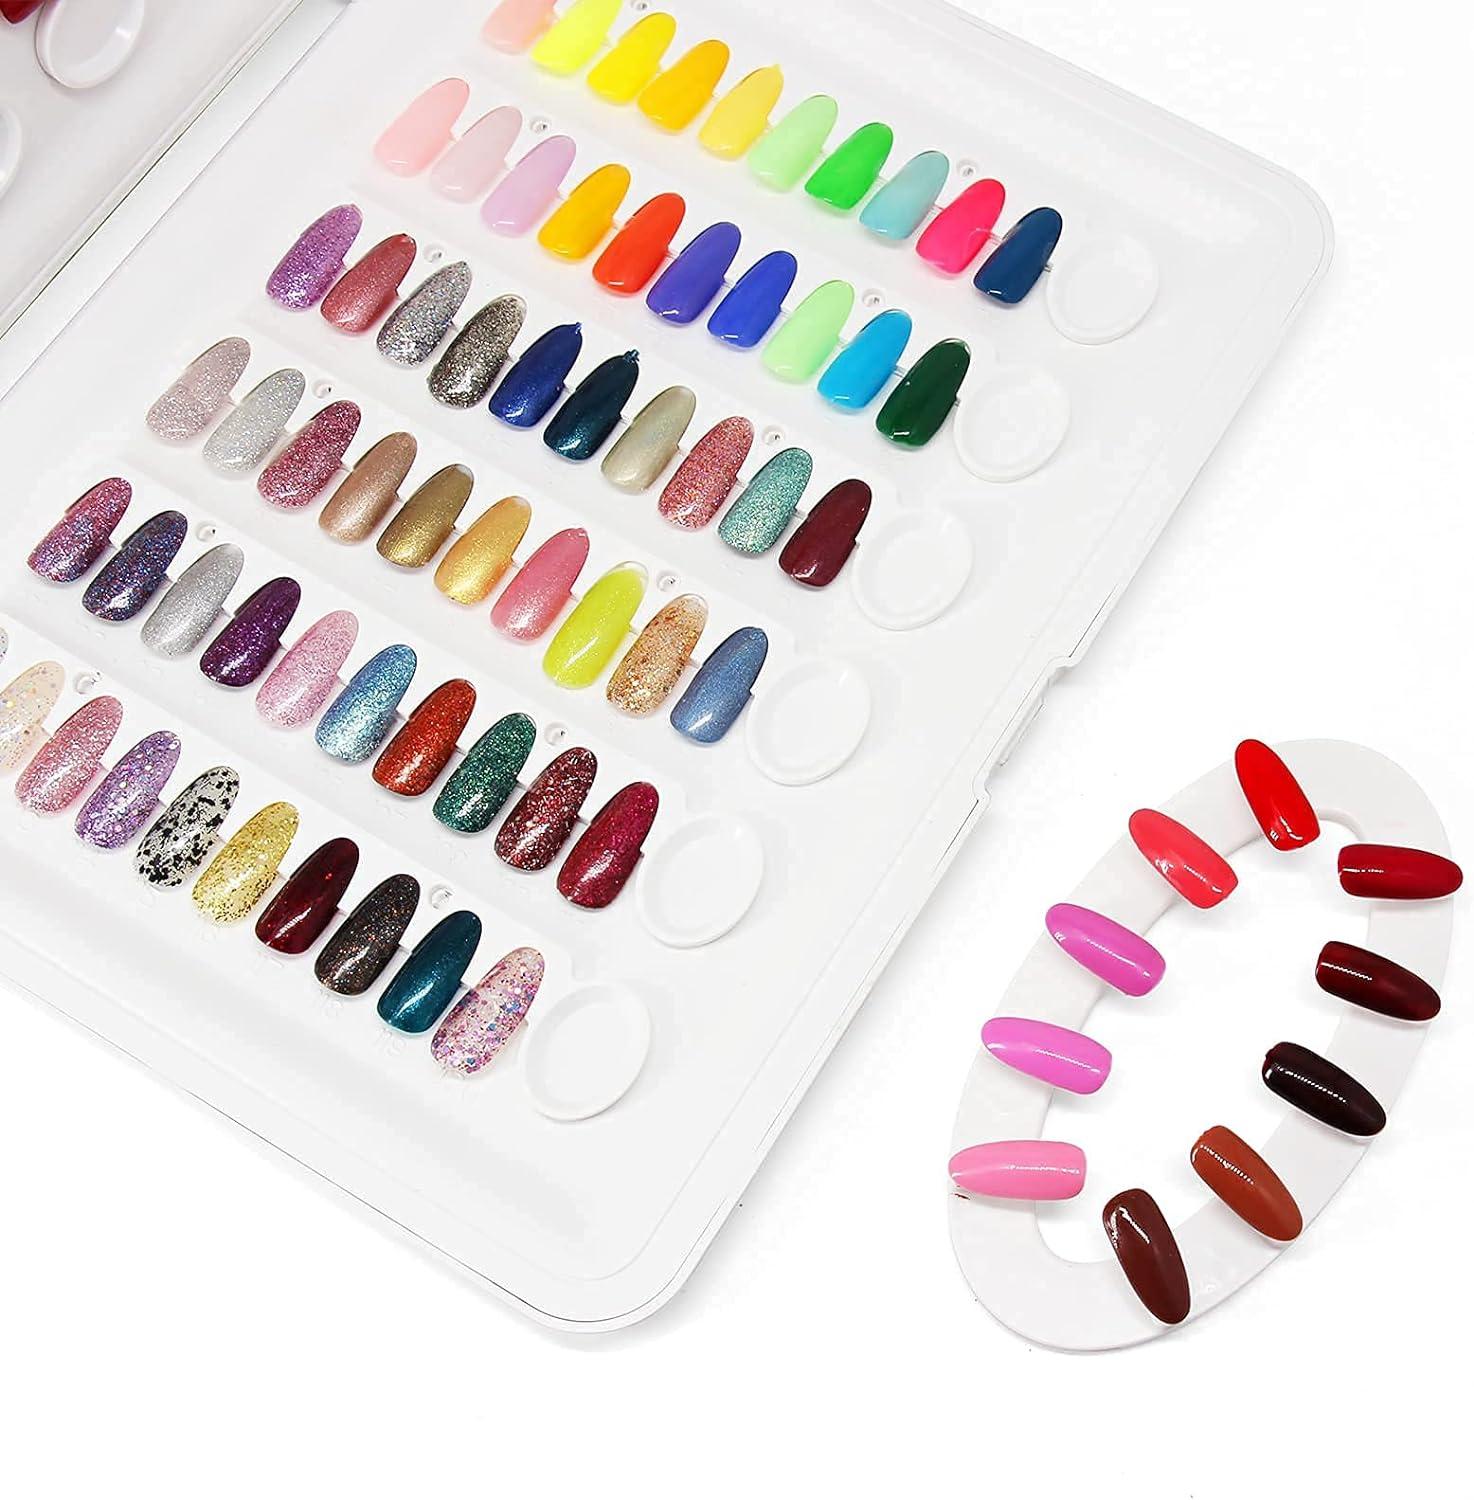 Noverlife 120 Nail Colors Display Book with 120 India | Ubuy